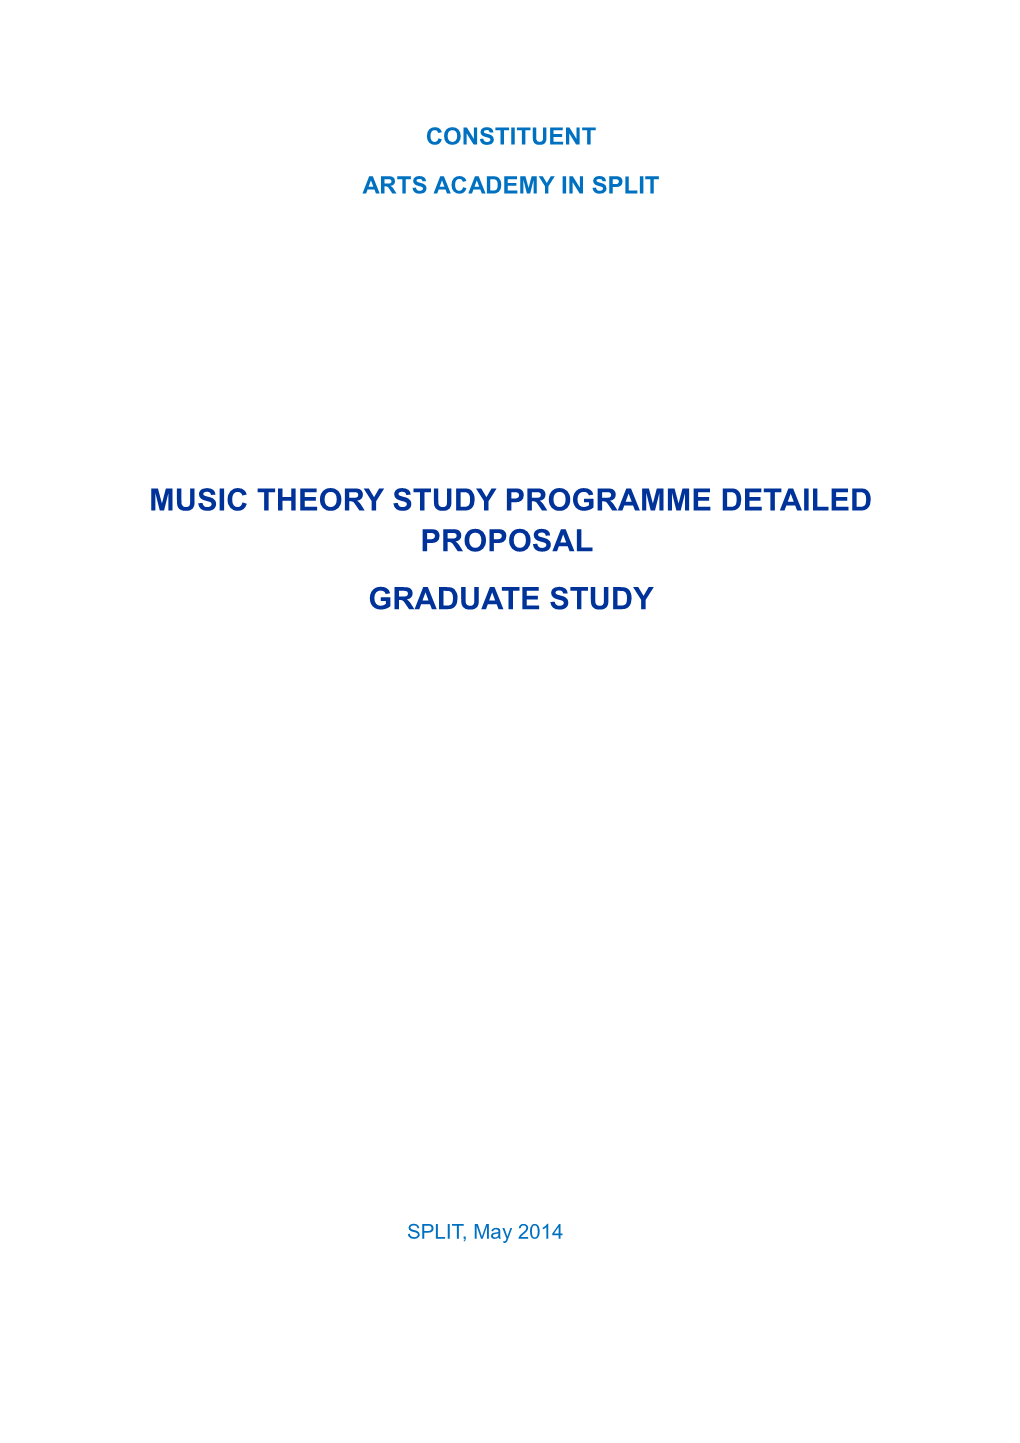 Music Theory Study Programme Detailed Proposal